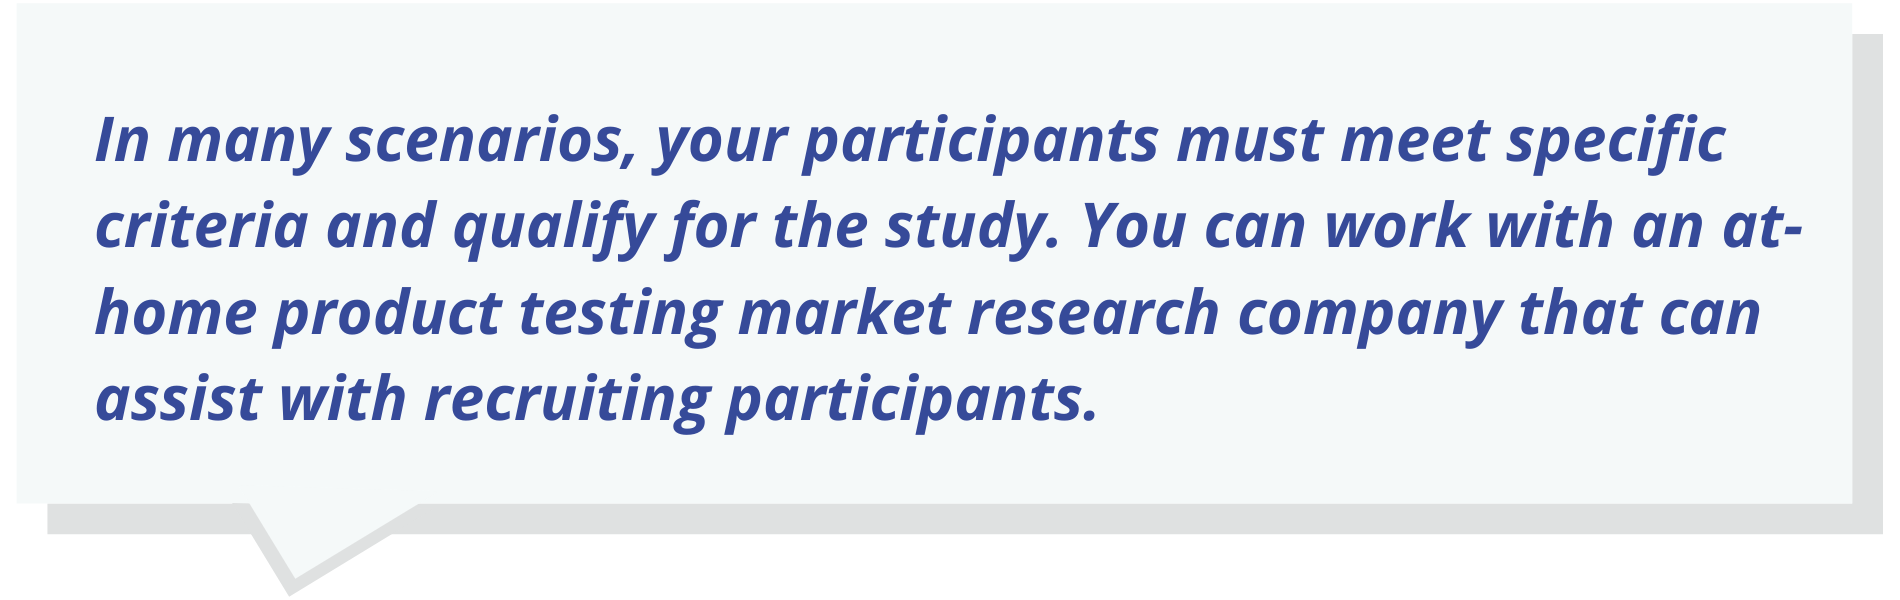 In many scenarios, your participants must meet specific criteria and qualify for the study. You can work with an at-home product testing market research company that can assist with recruiting participants.